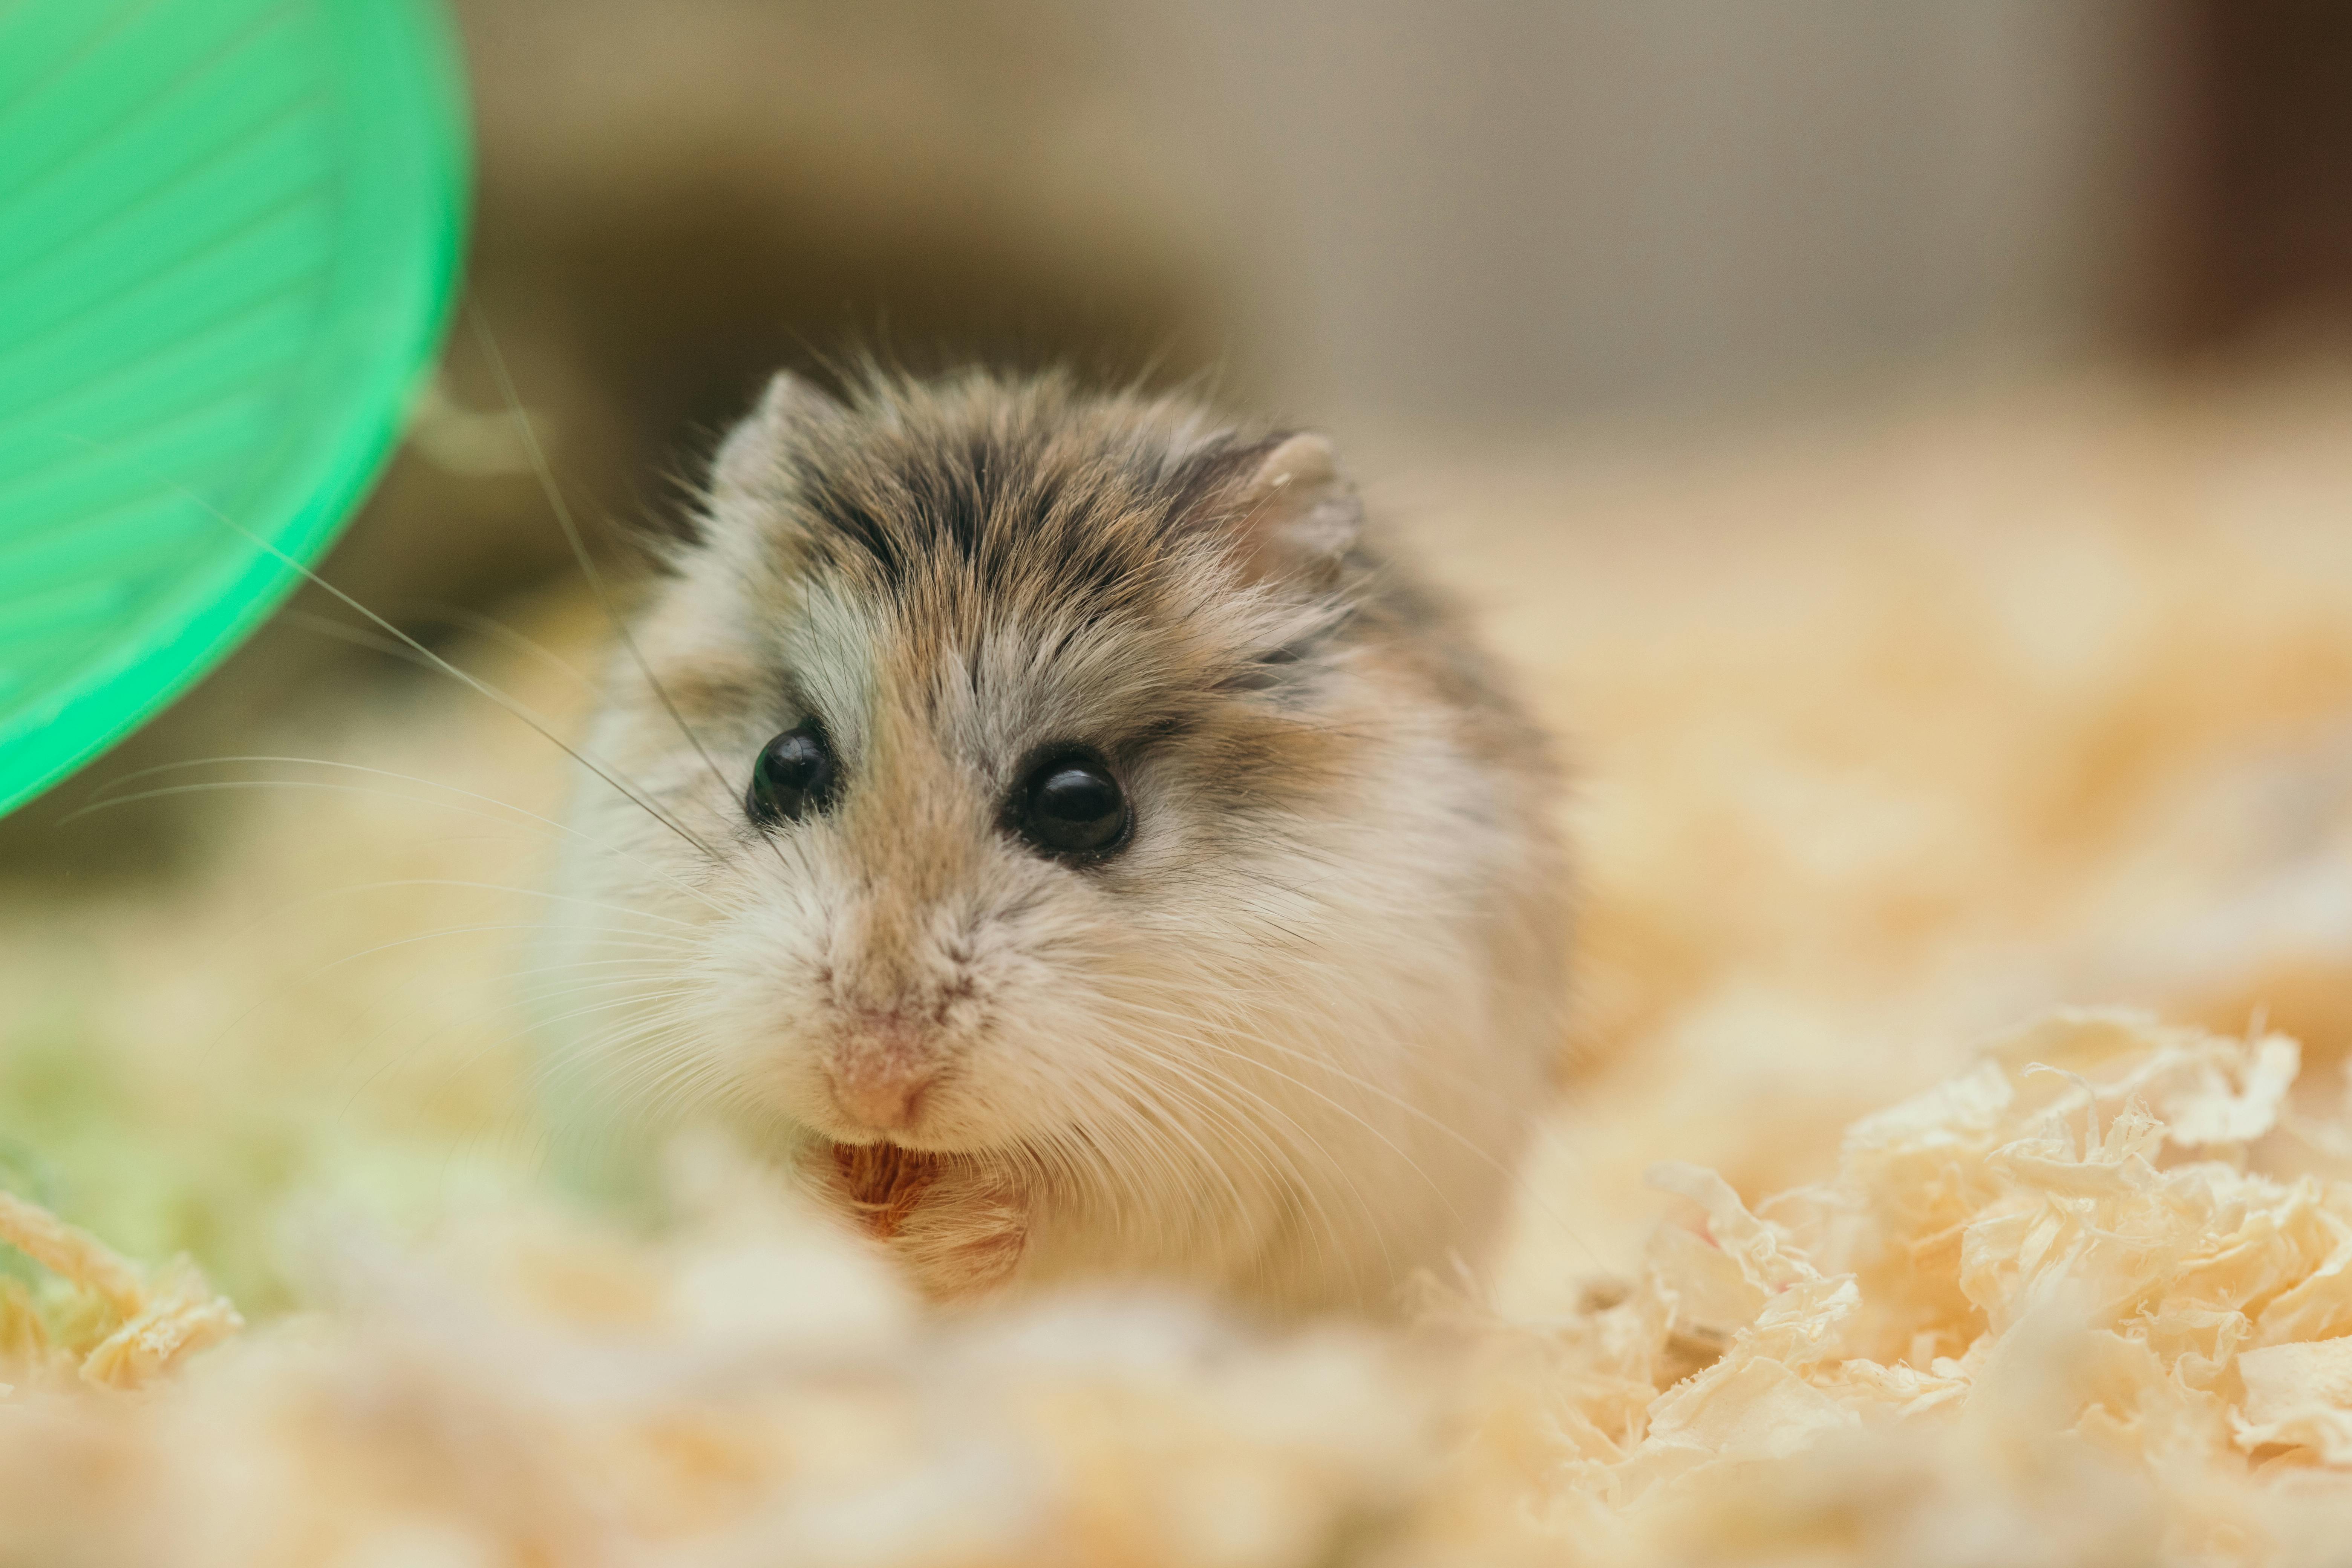 A caged hamster eating food. | Photo: Pexels